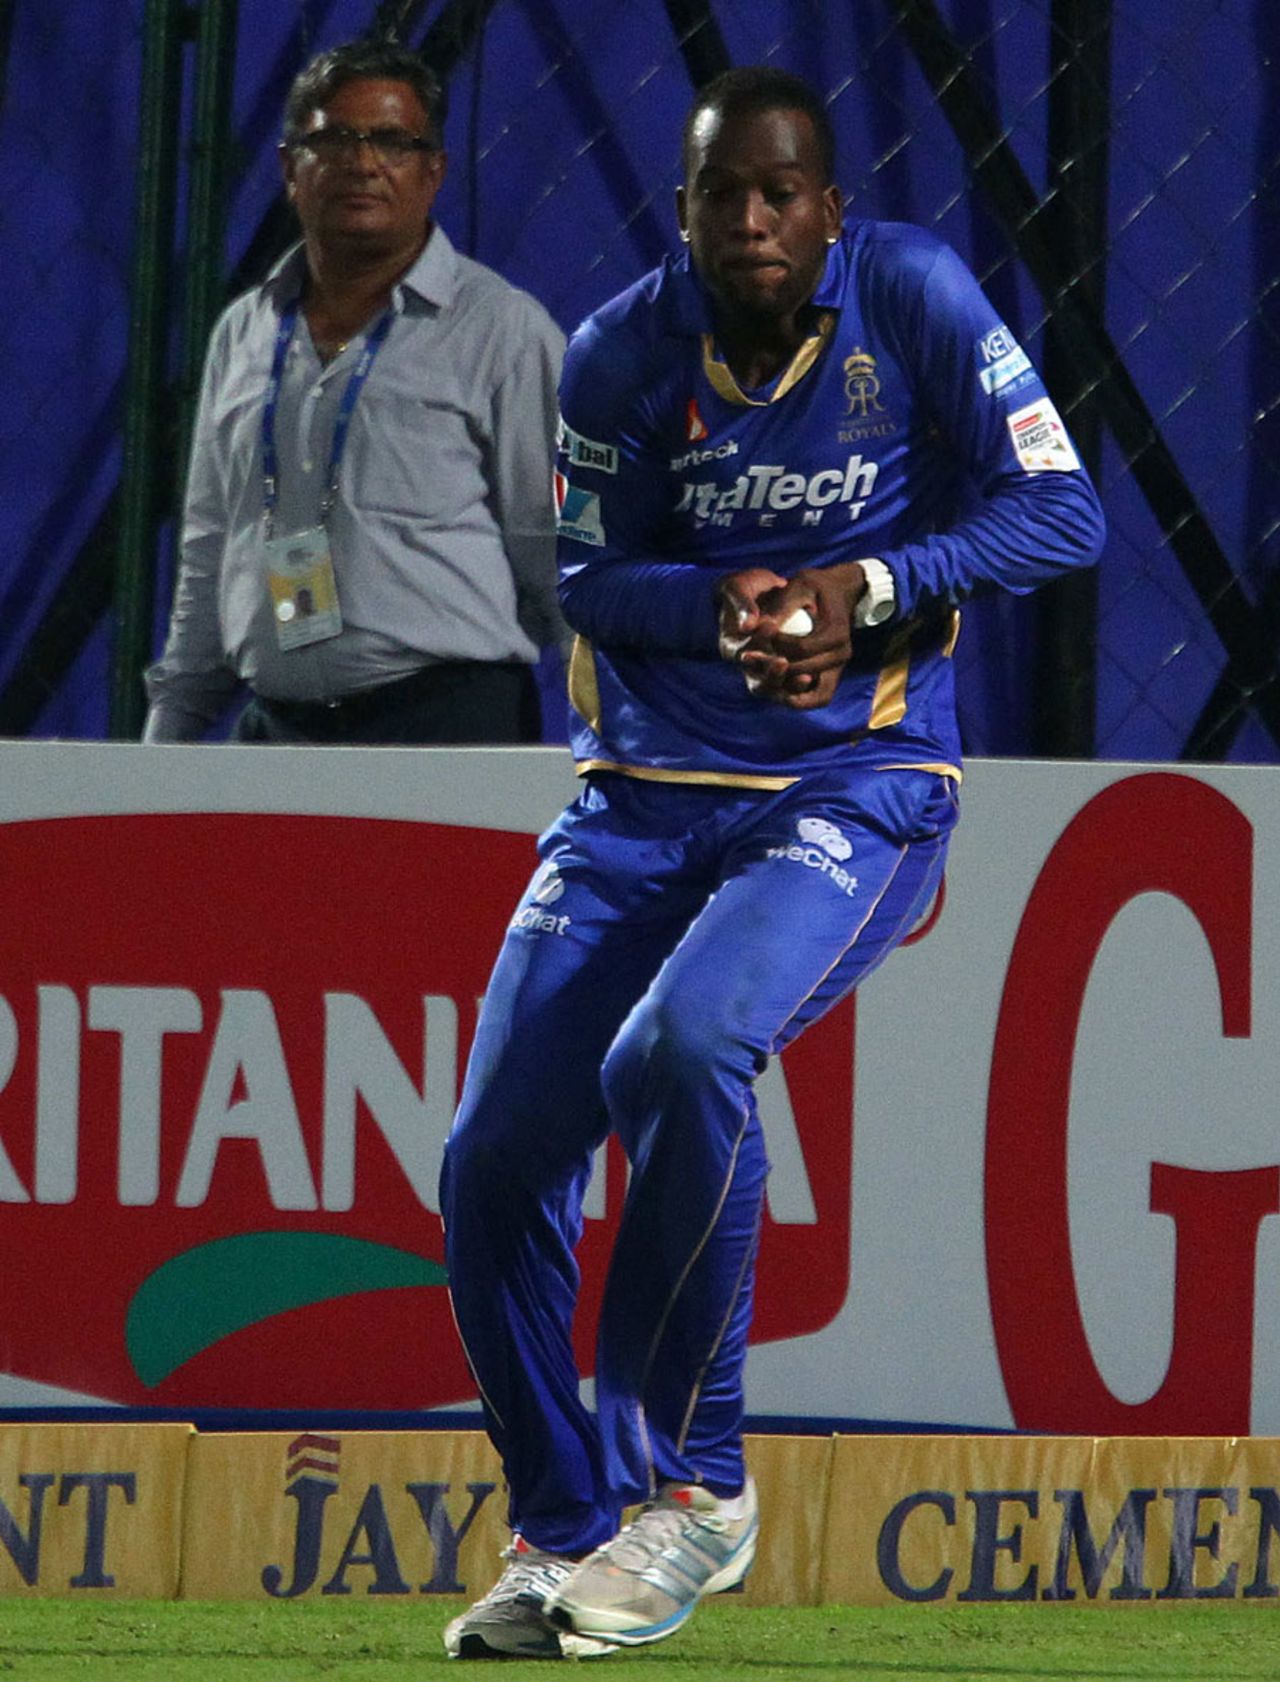 Kevon Cooper completes a catch near the boundary, Perth Scorchers v Rajasthan Royals, Group A, Champions League 2013, Jaipur, September 29, 2013